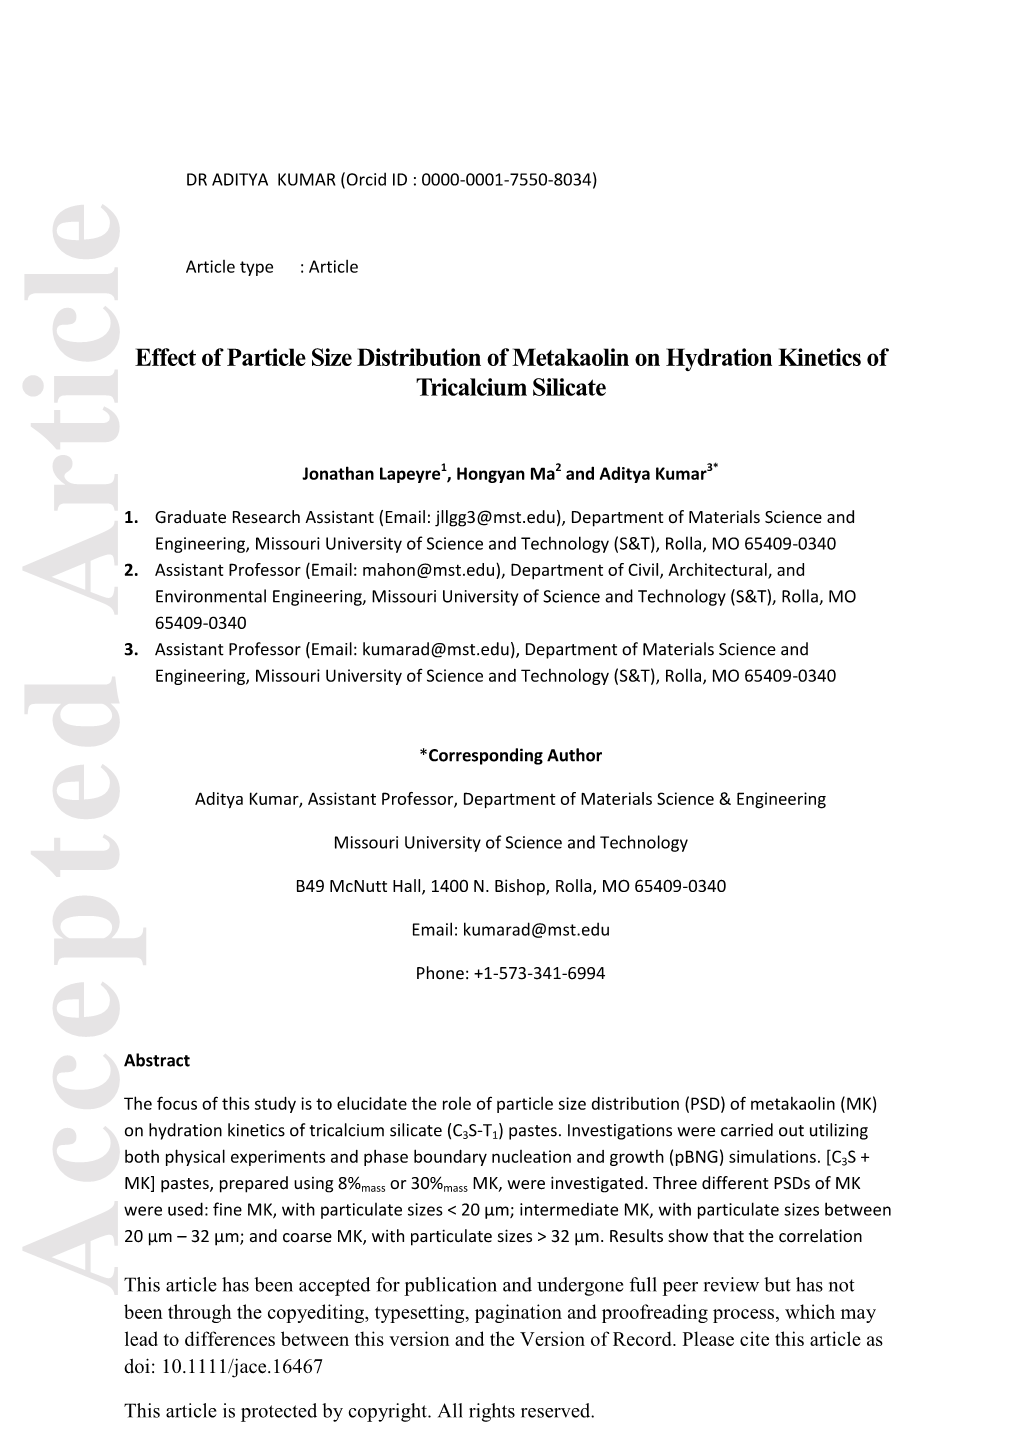 Effect of Particle Size Distribution of Metakaolin on Hydration Kinetics Of